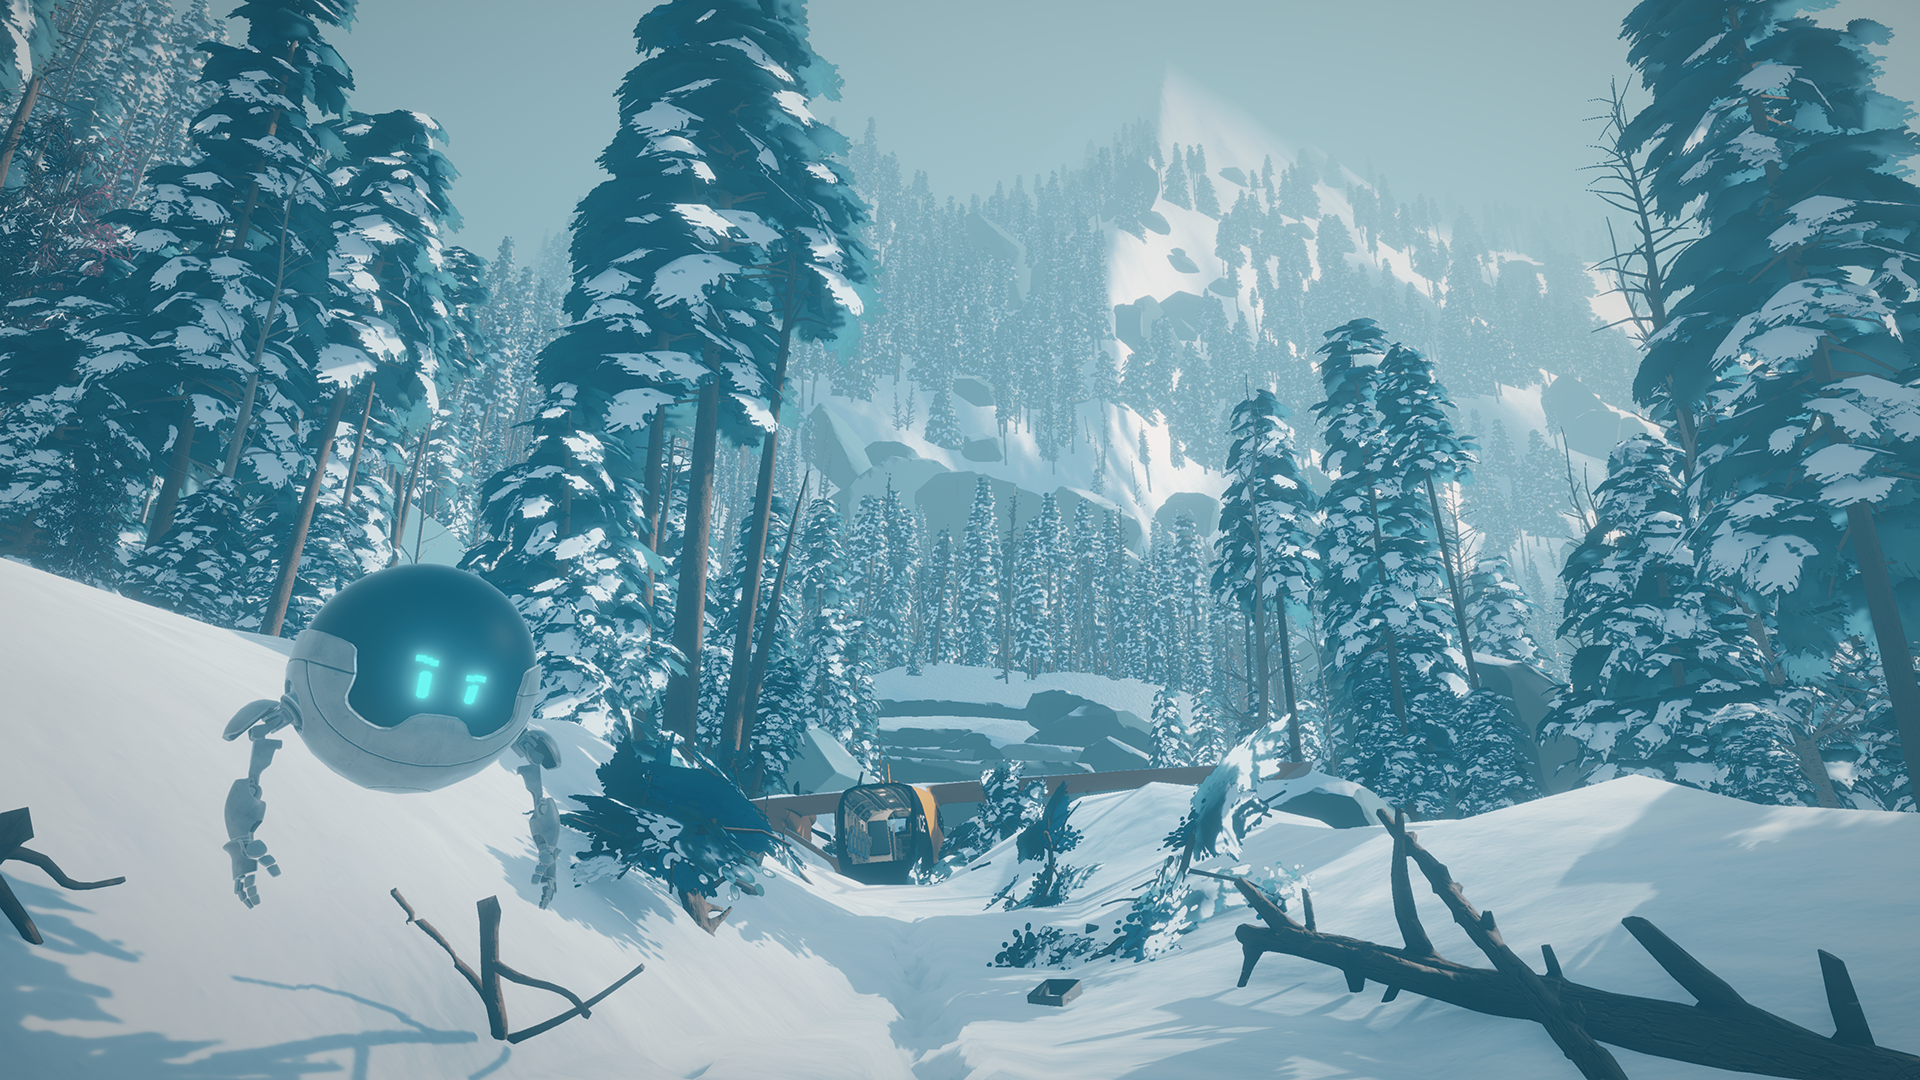 A screengrab from a video game depicts a snow-covered, hazy blue mountain forest scene with a round, floating robot with blue LED eyes in the foreground